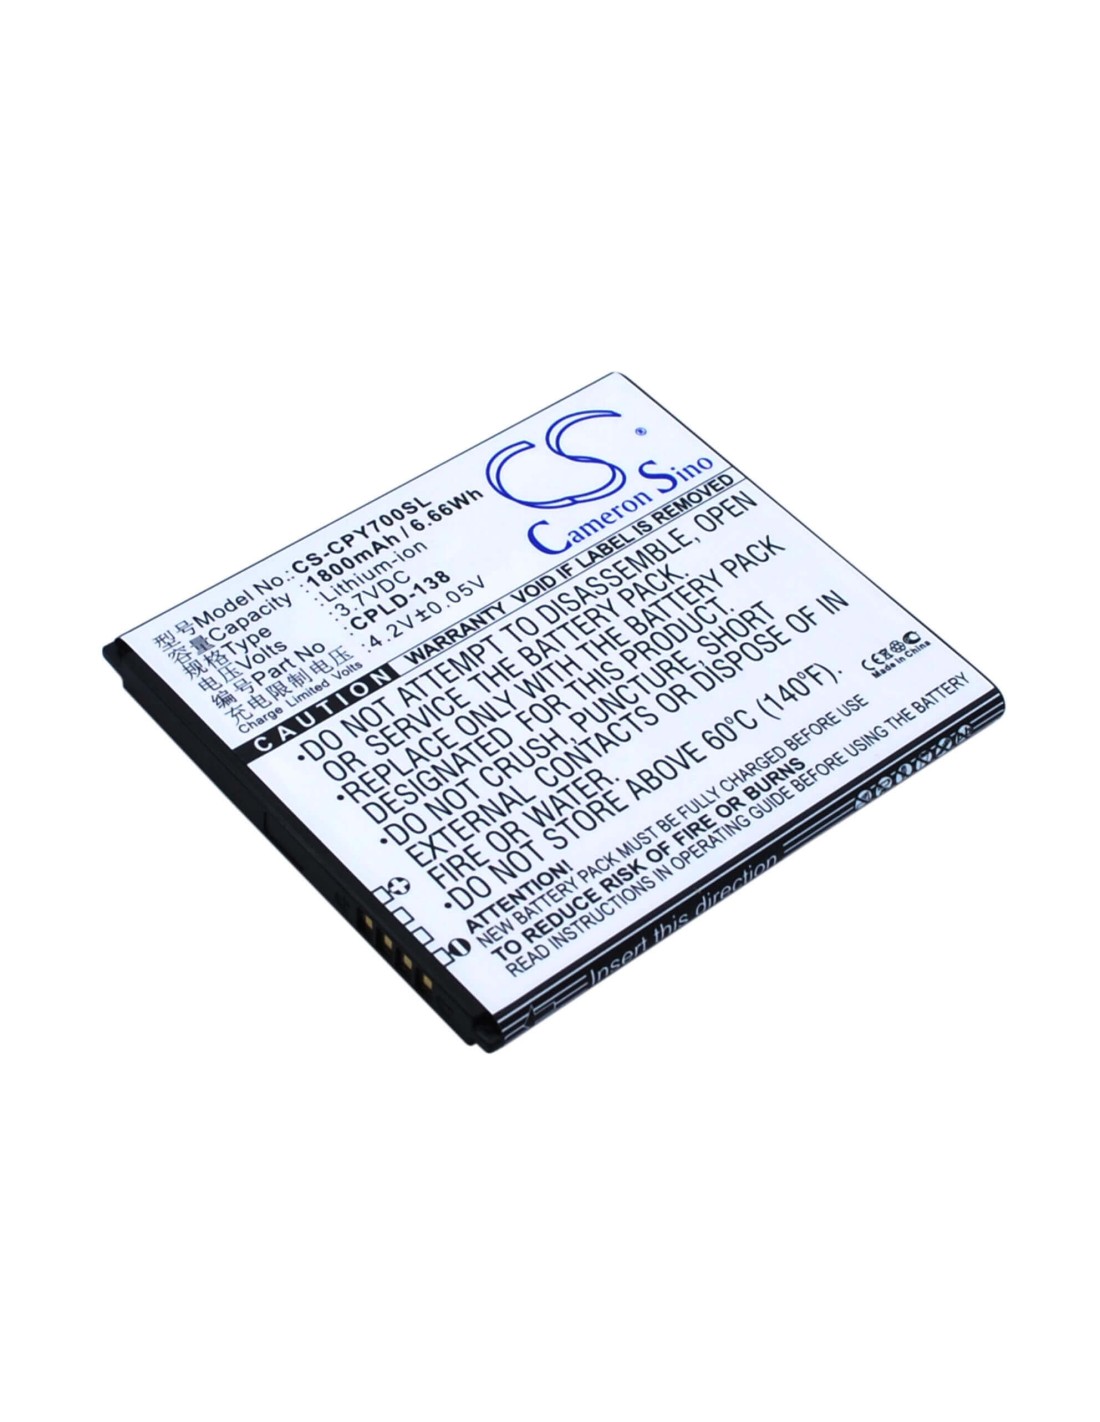 Battery for Coolpad Y70-C, Y60-C1, Y80-C 3.7V, 1800mAh - 6.66Wh